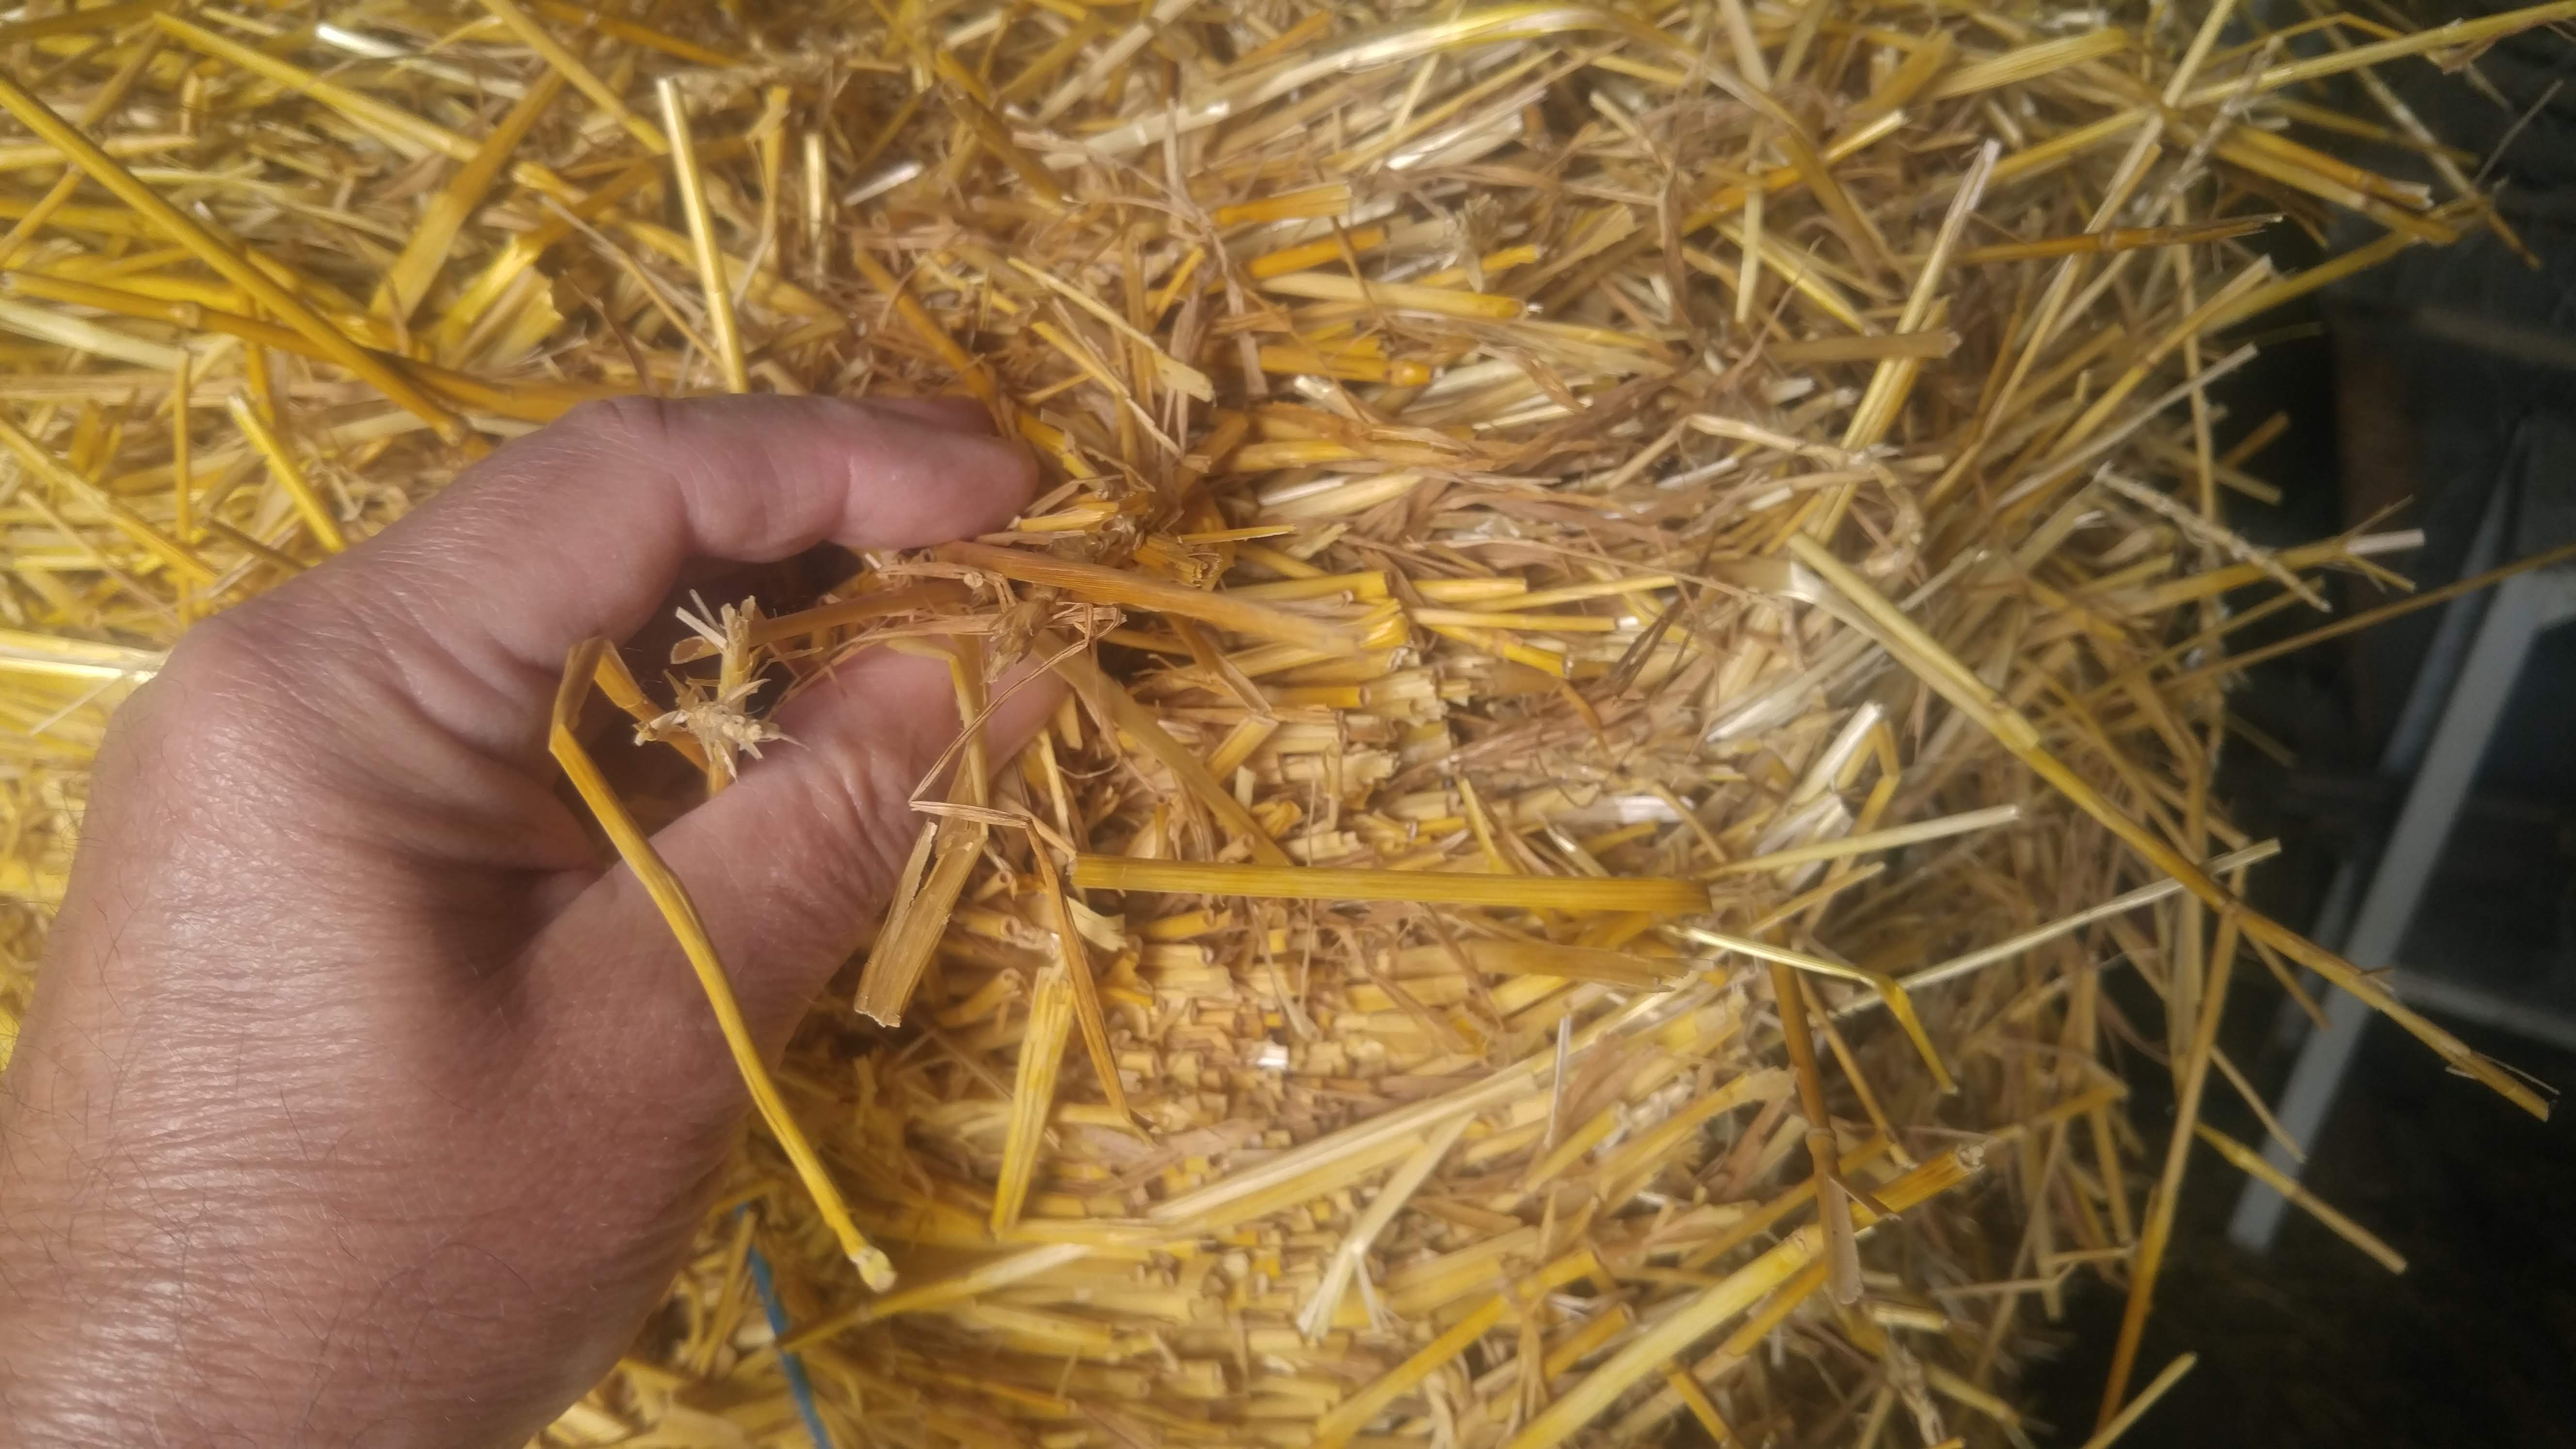 Clean wheat straw has an even amber color.